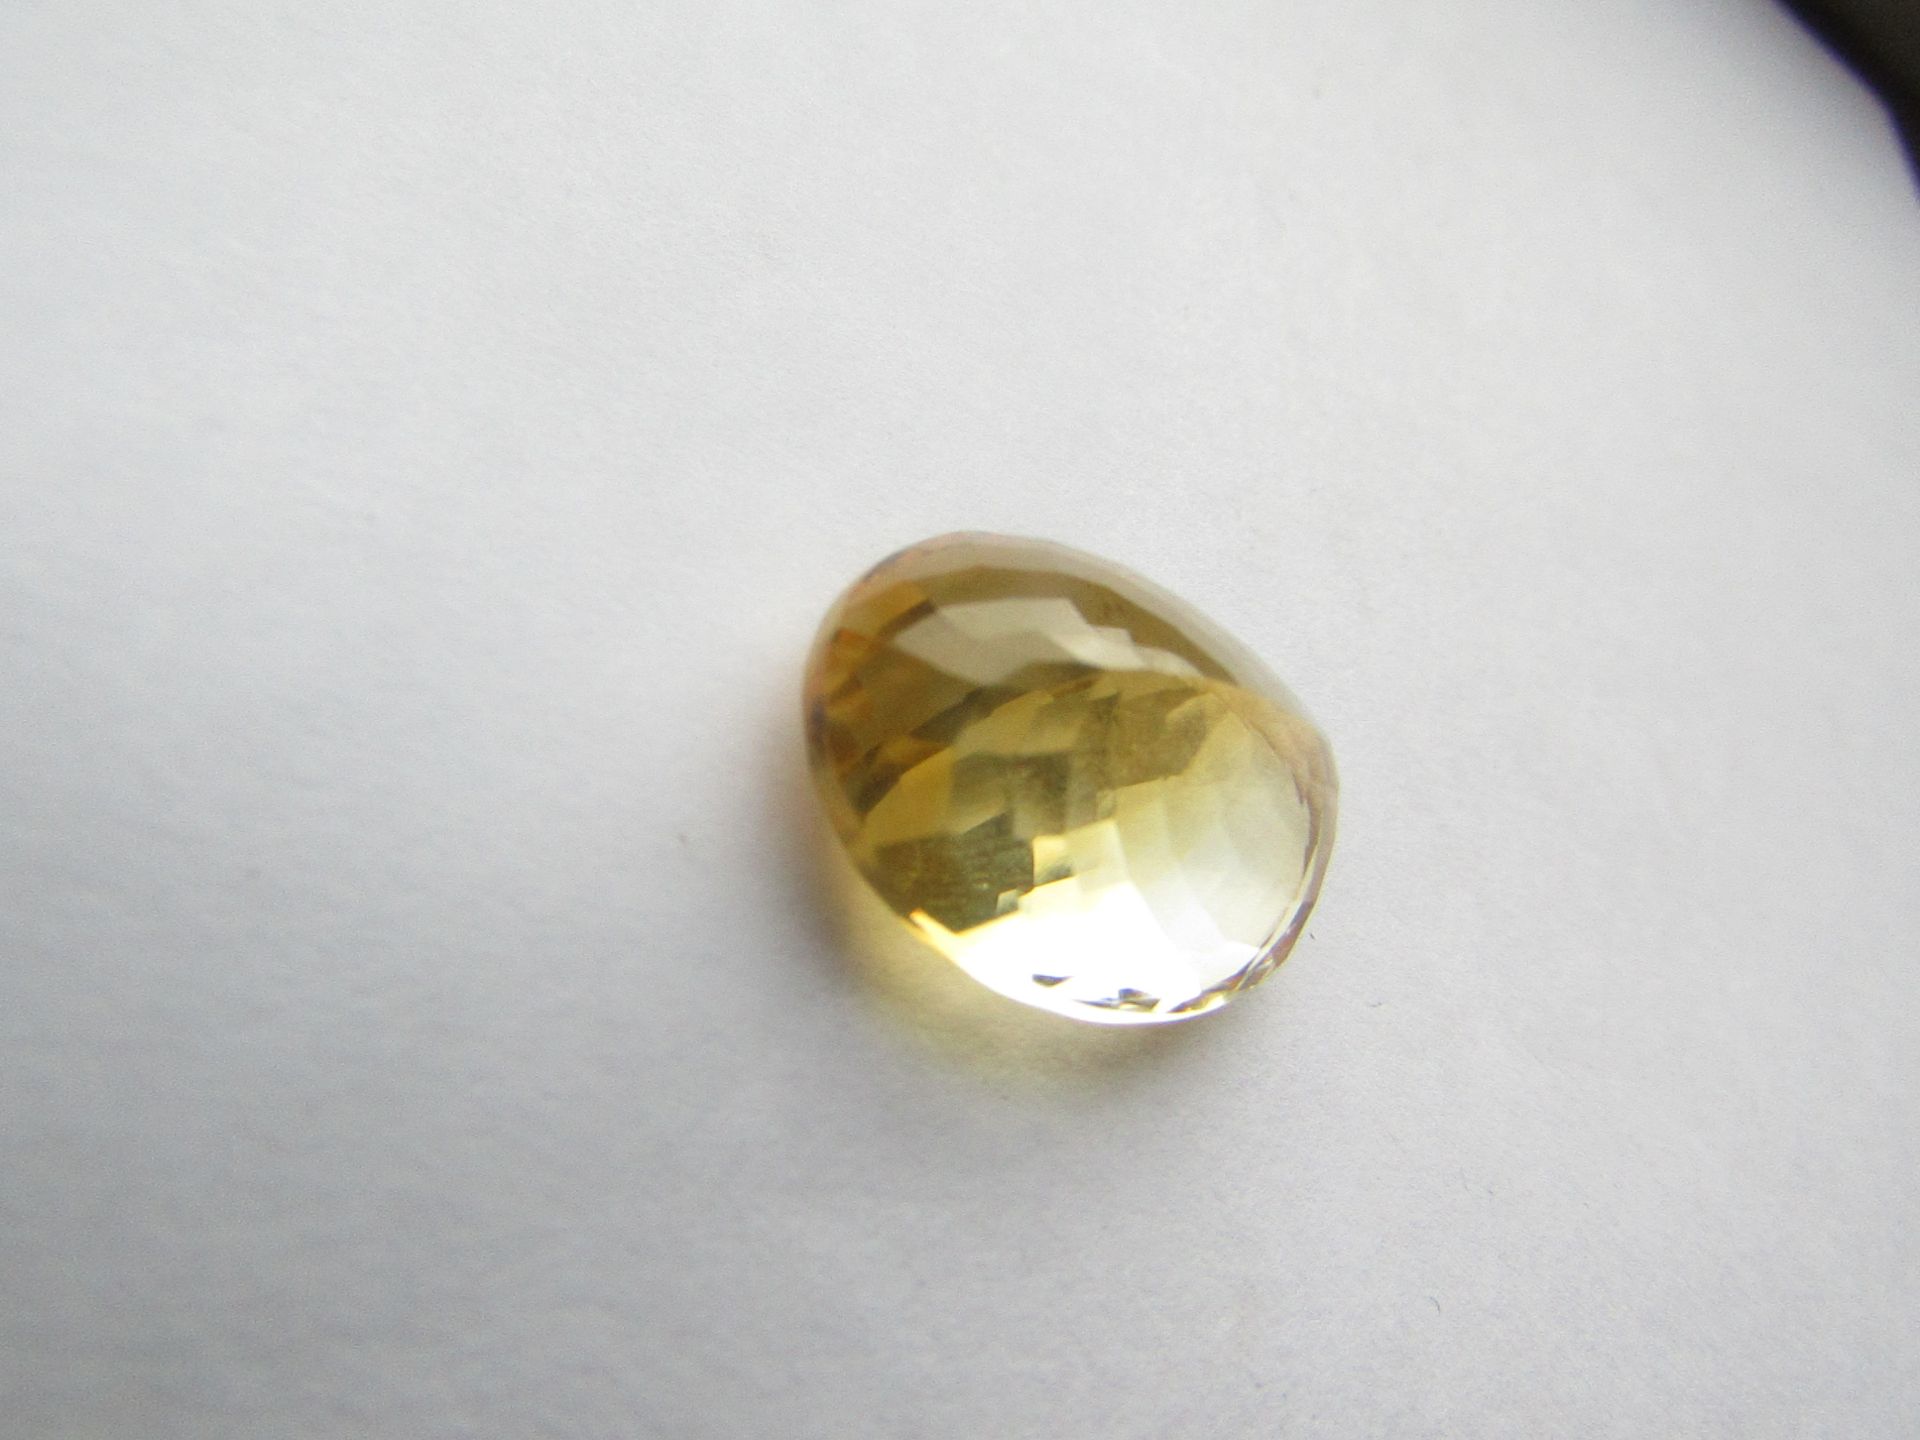 Yellow Golden Citrine Gem 18.54 cts  from Brazil Natural and Untreated